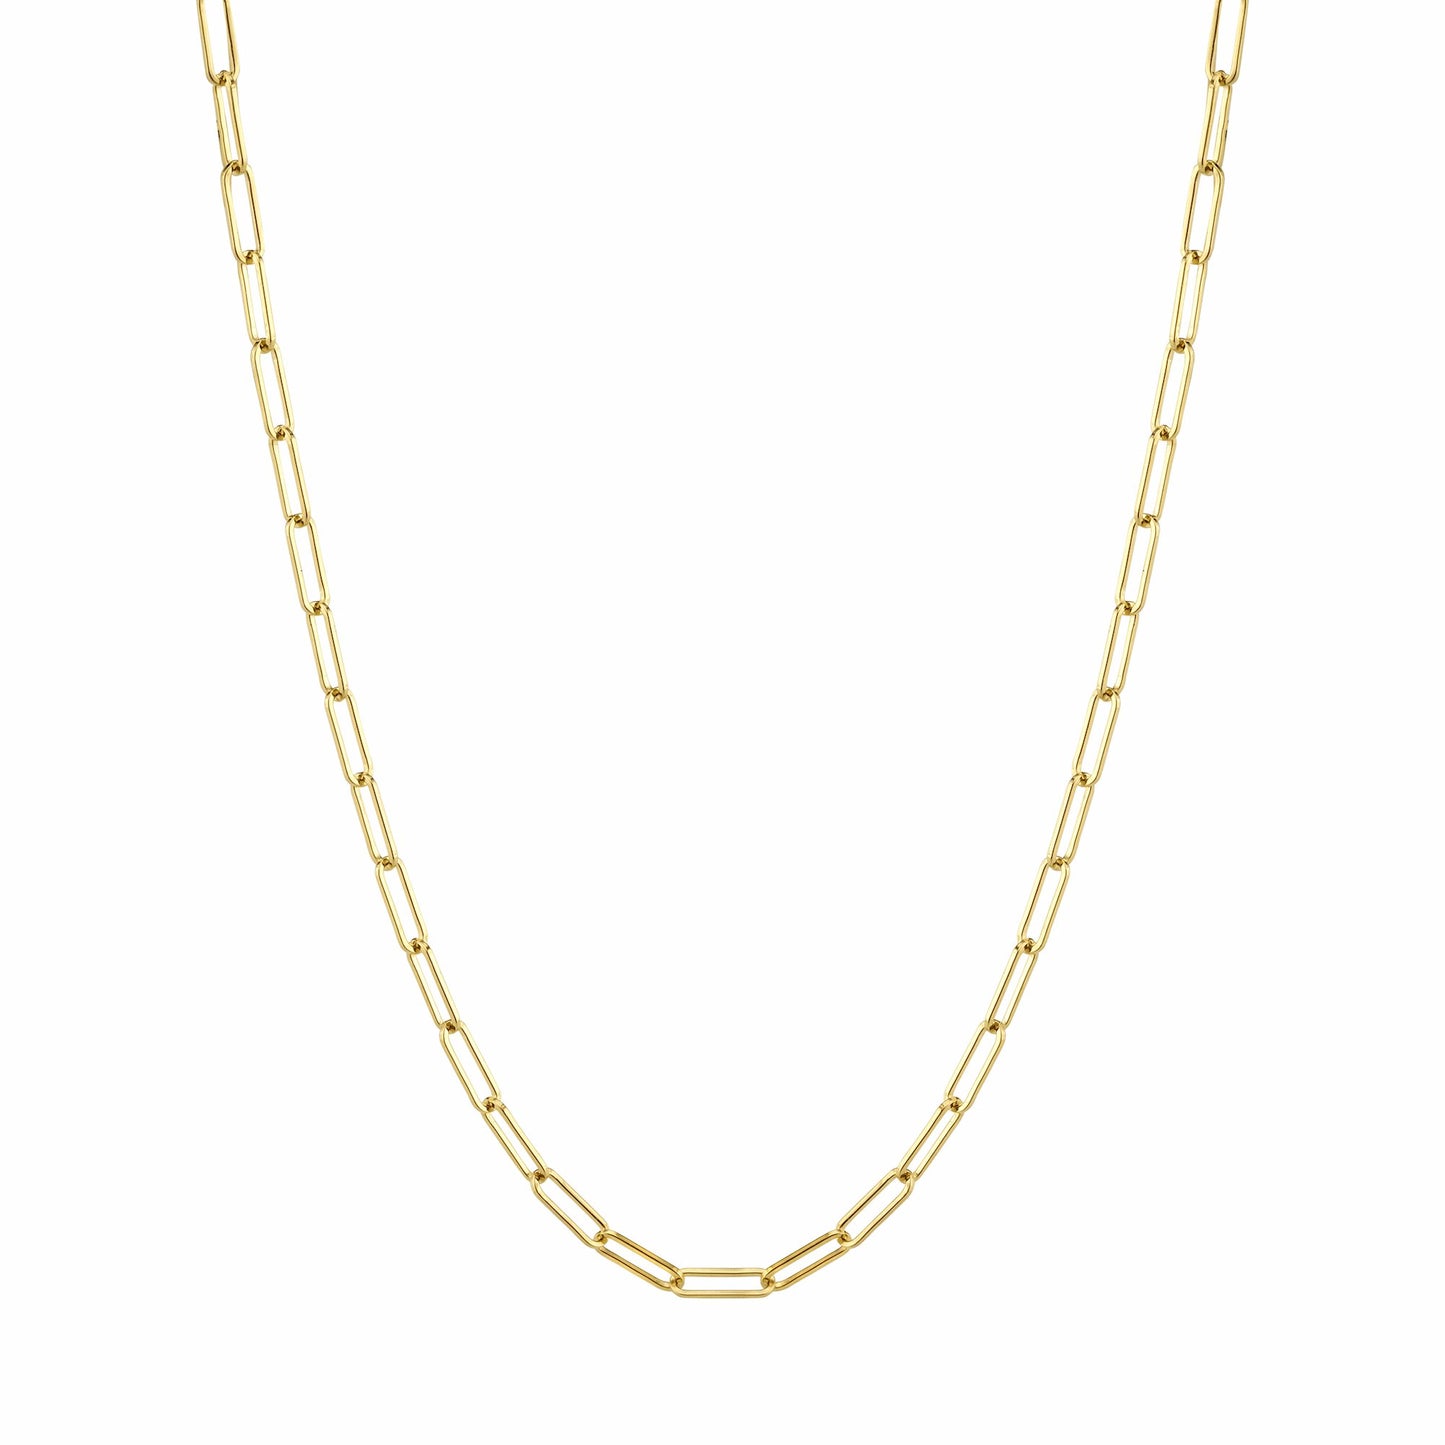 Staple Chain Necklace 14K Yellow Gold / 16In